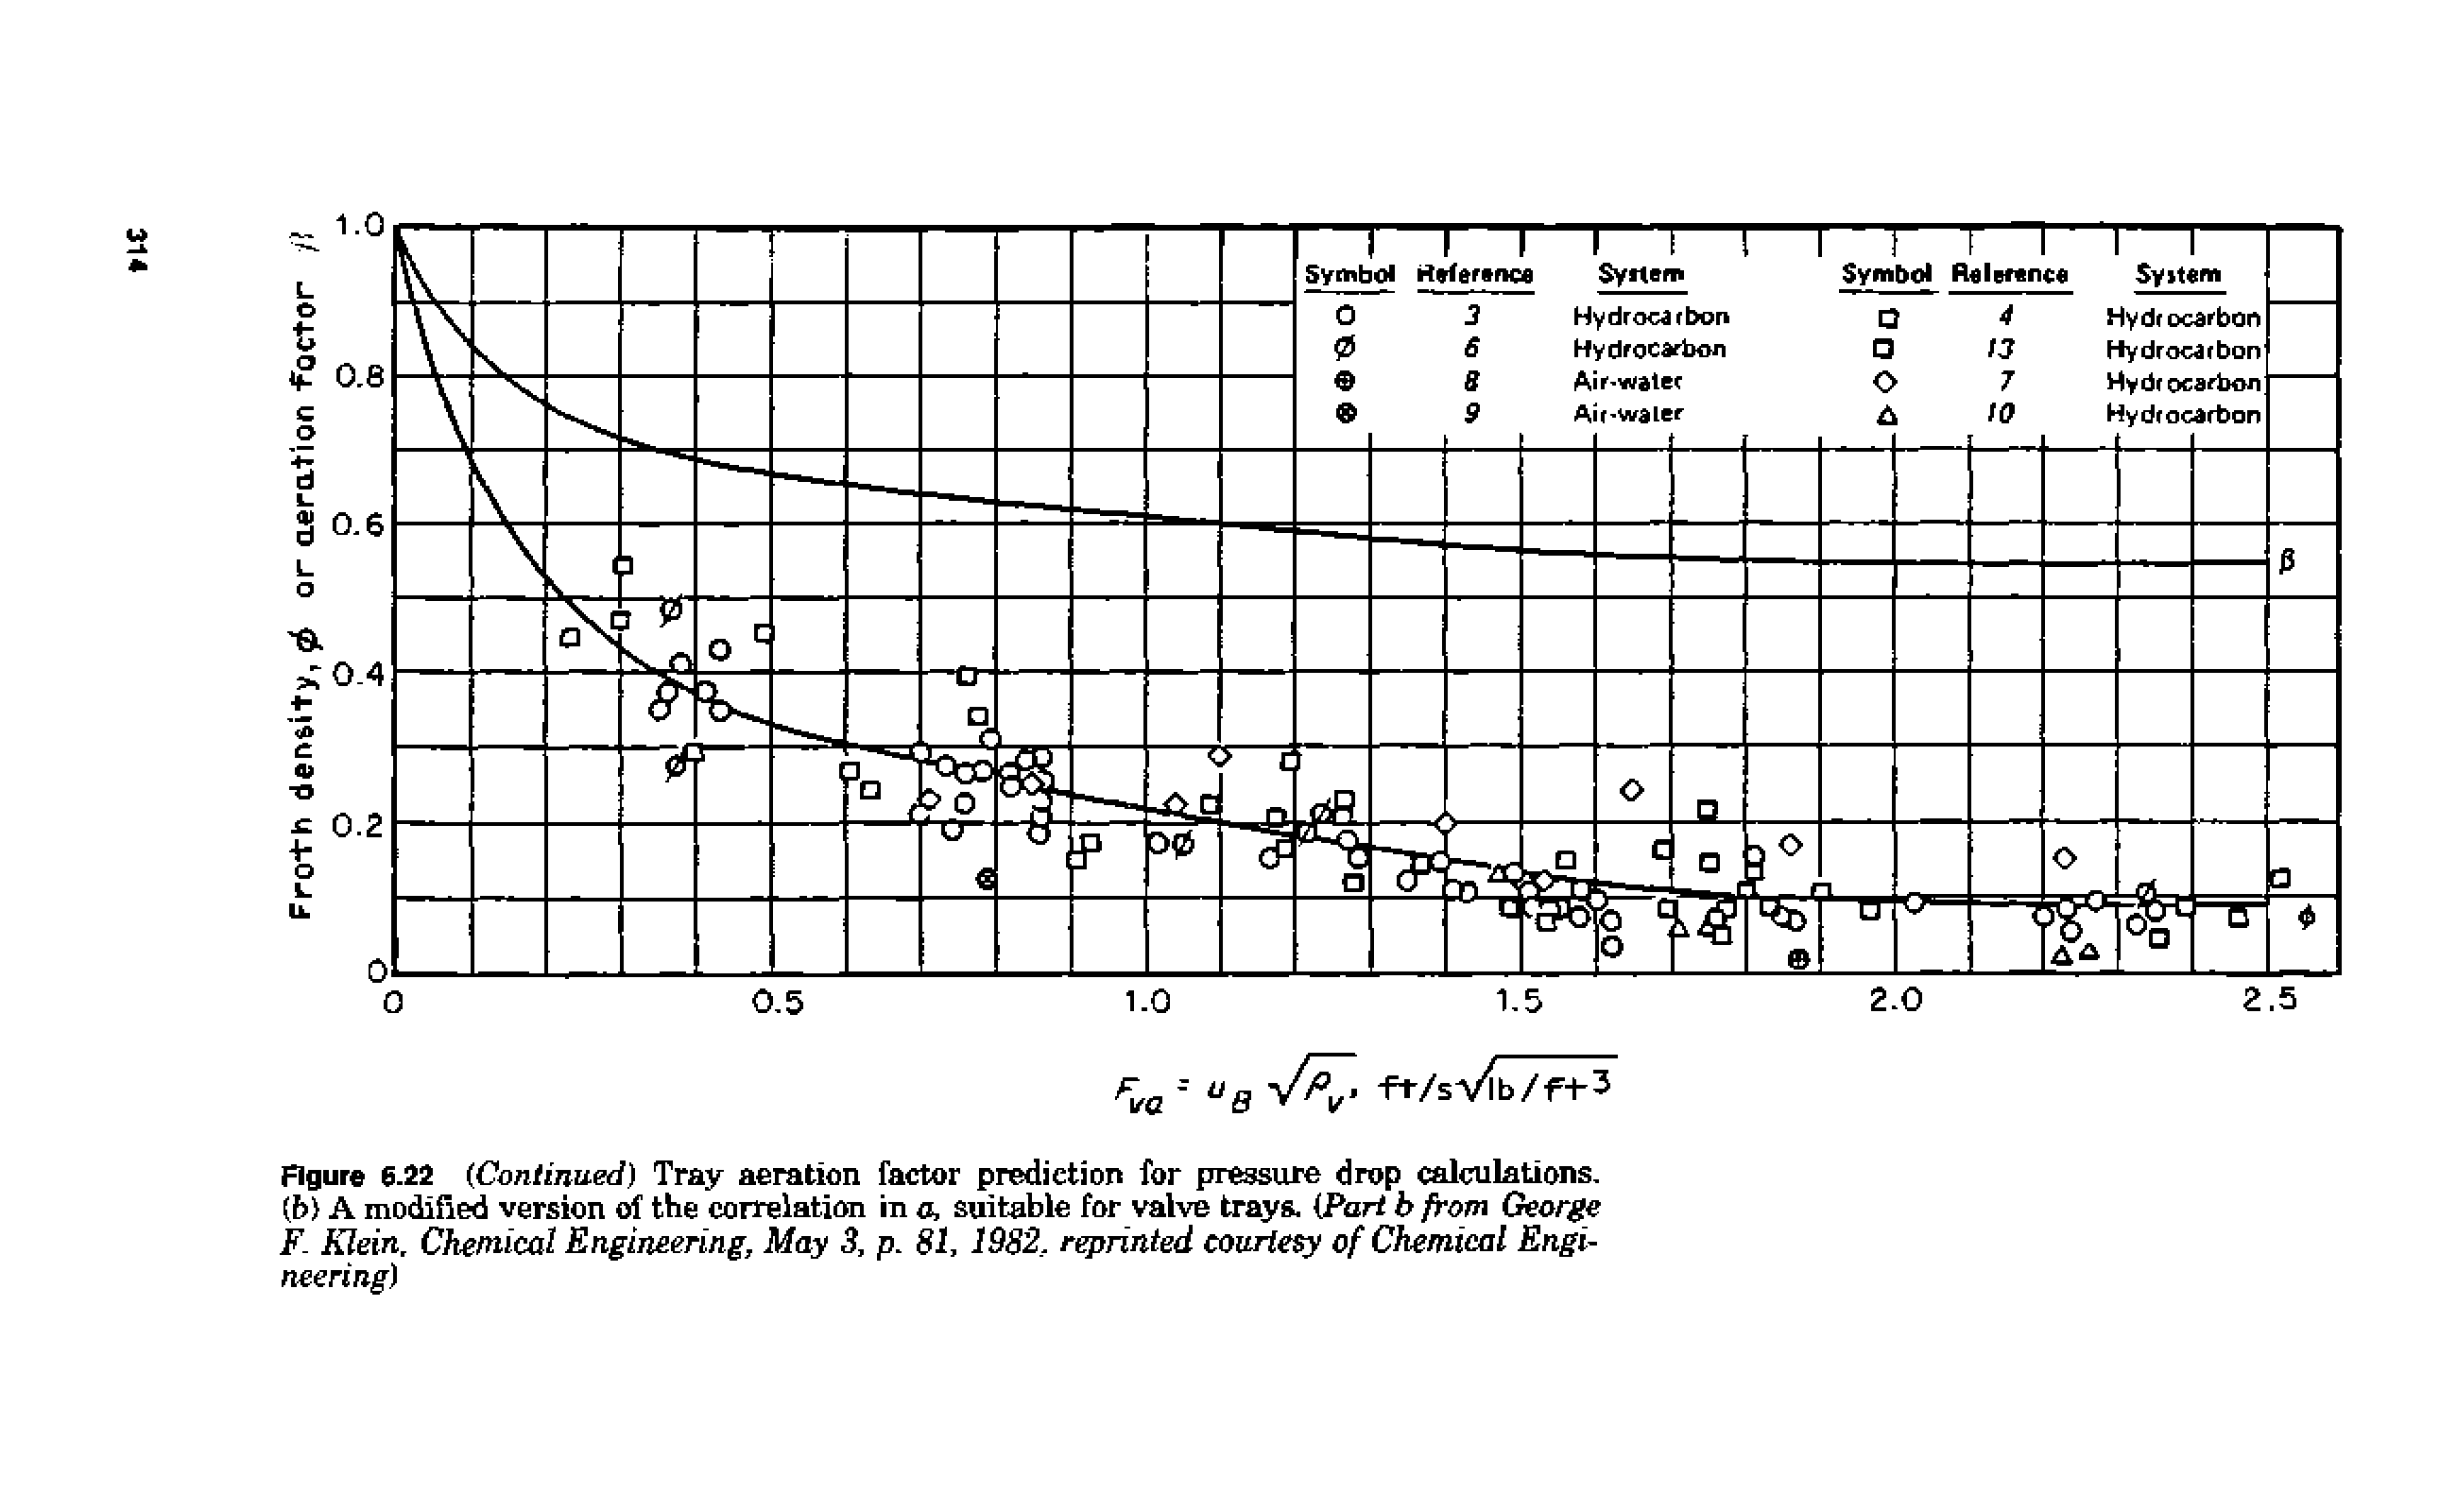 Figure 6.22 (Continued) Tray aeration factor prediction for pressure drop calculations. (t>) A modified version of the correlation in a, suitable for valve trays. (Part b from George F. Klein. Chemical Engineering, May 3, p. 81, 1982, reprinted courtesy of Chemical Engineering)...